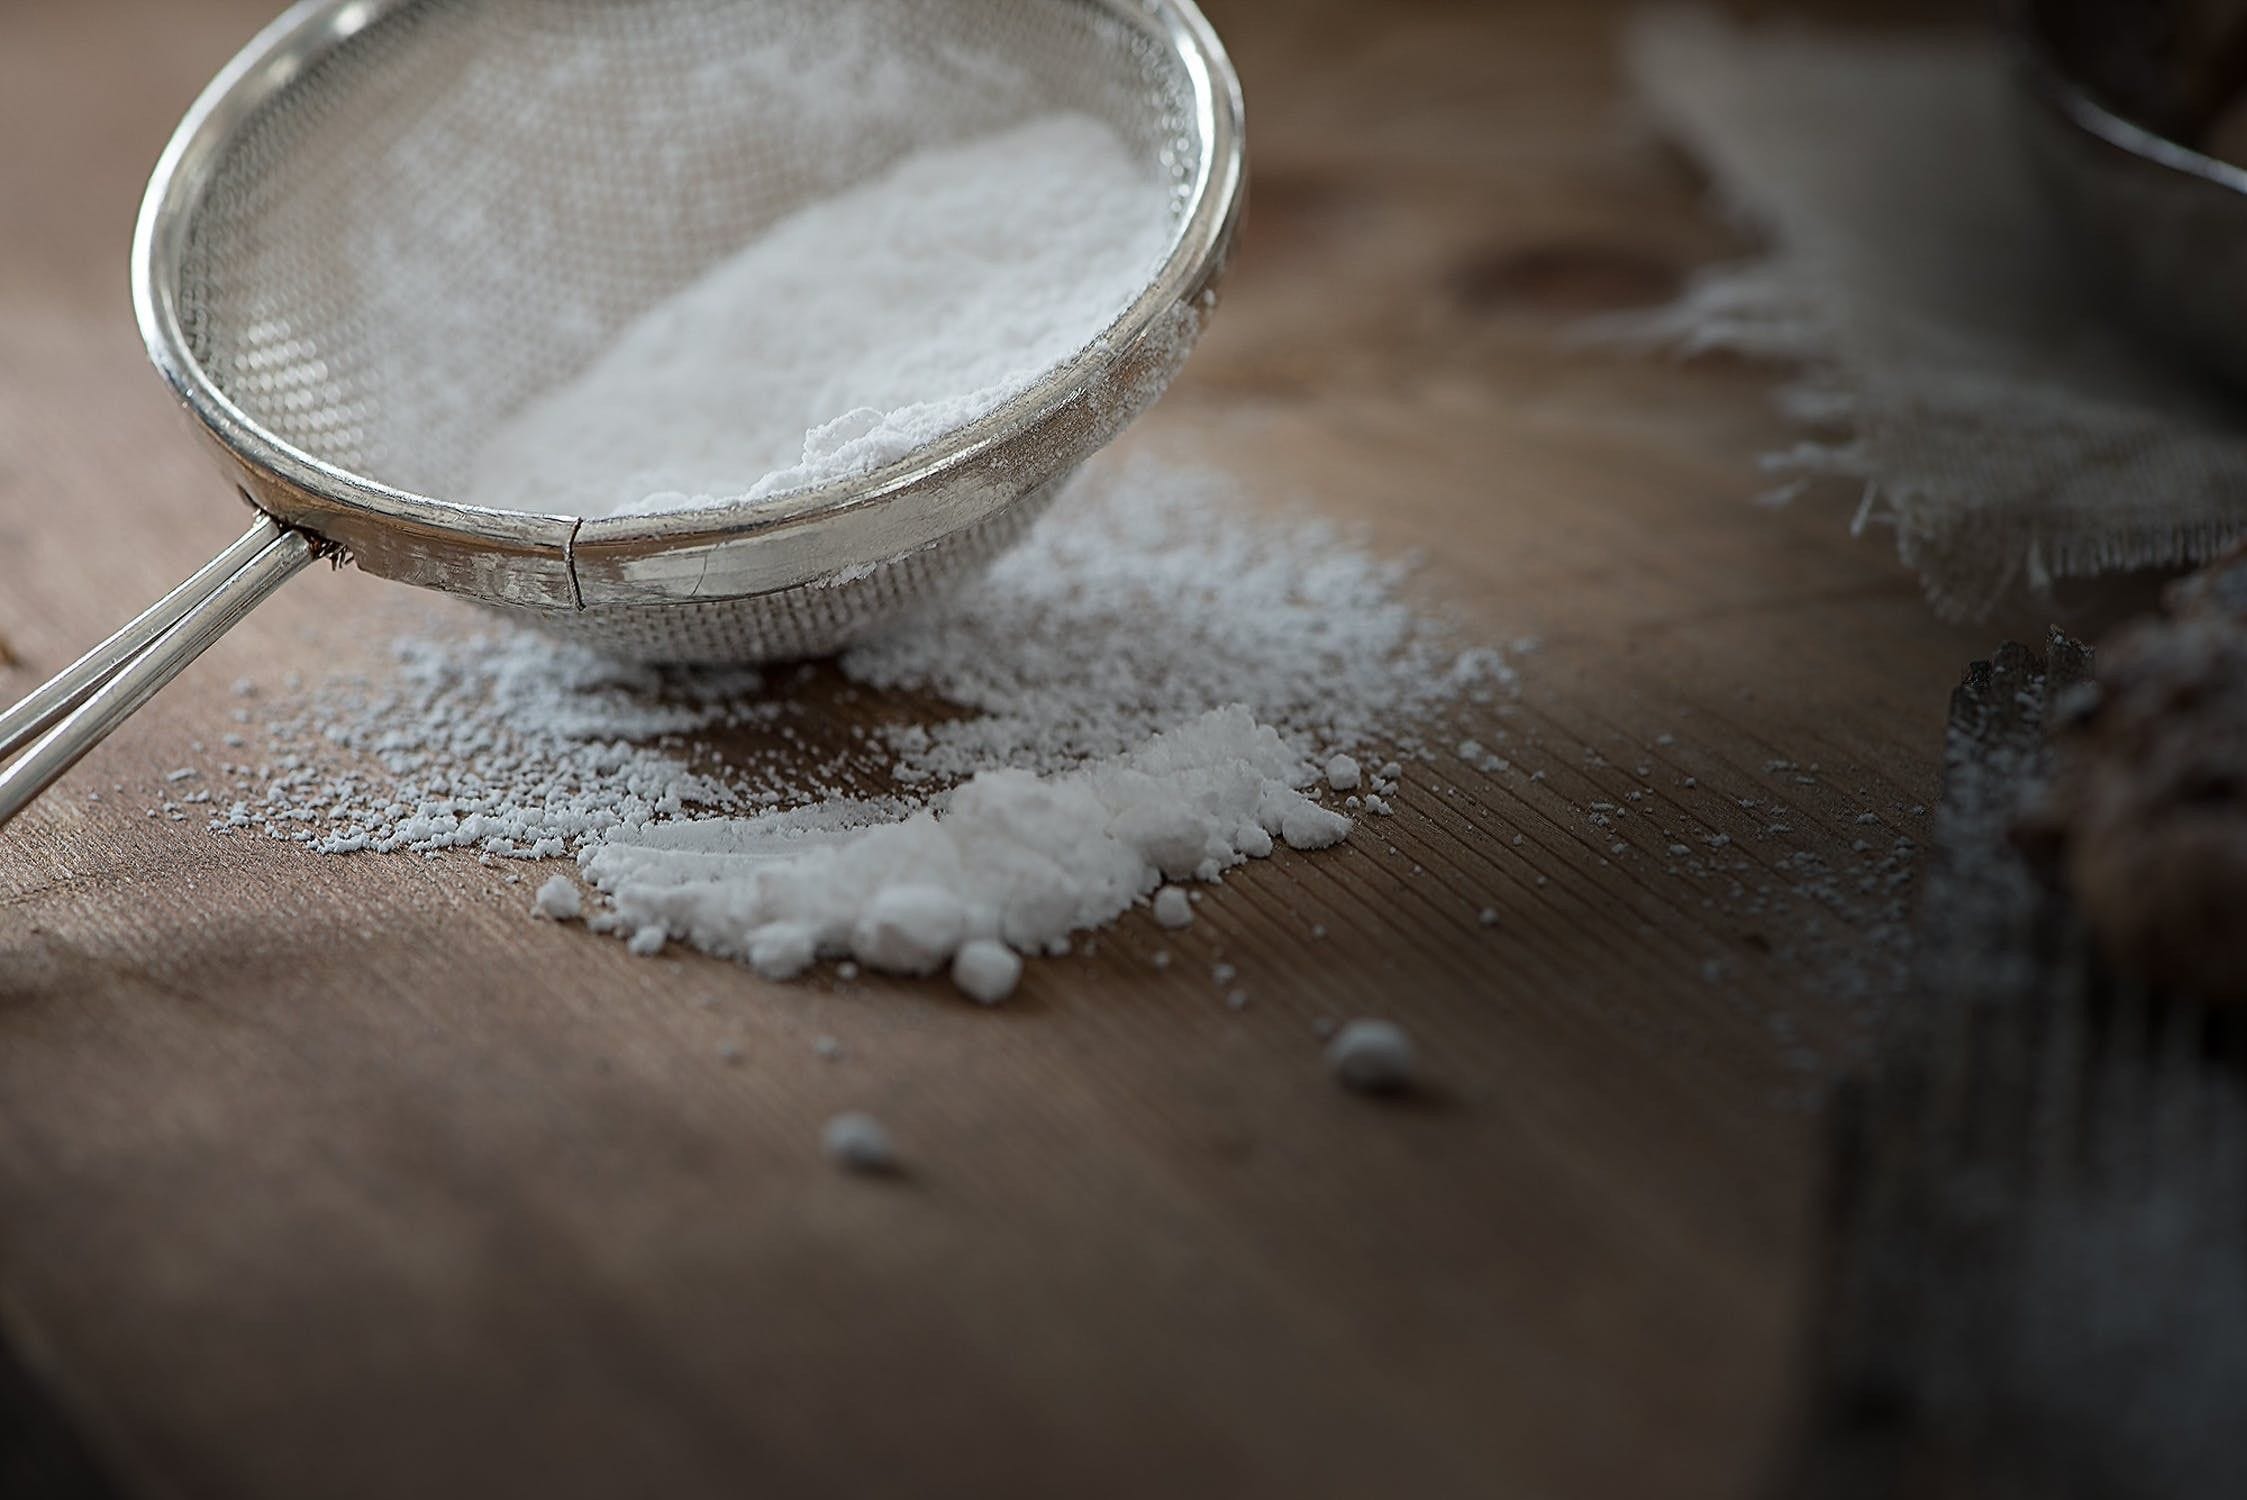 4 Ways to Avoid Sneaky Sugars Hiding in Your Food